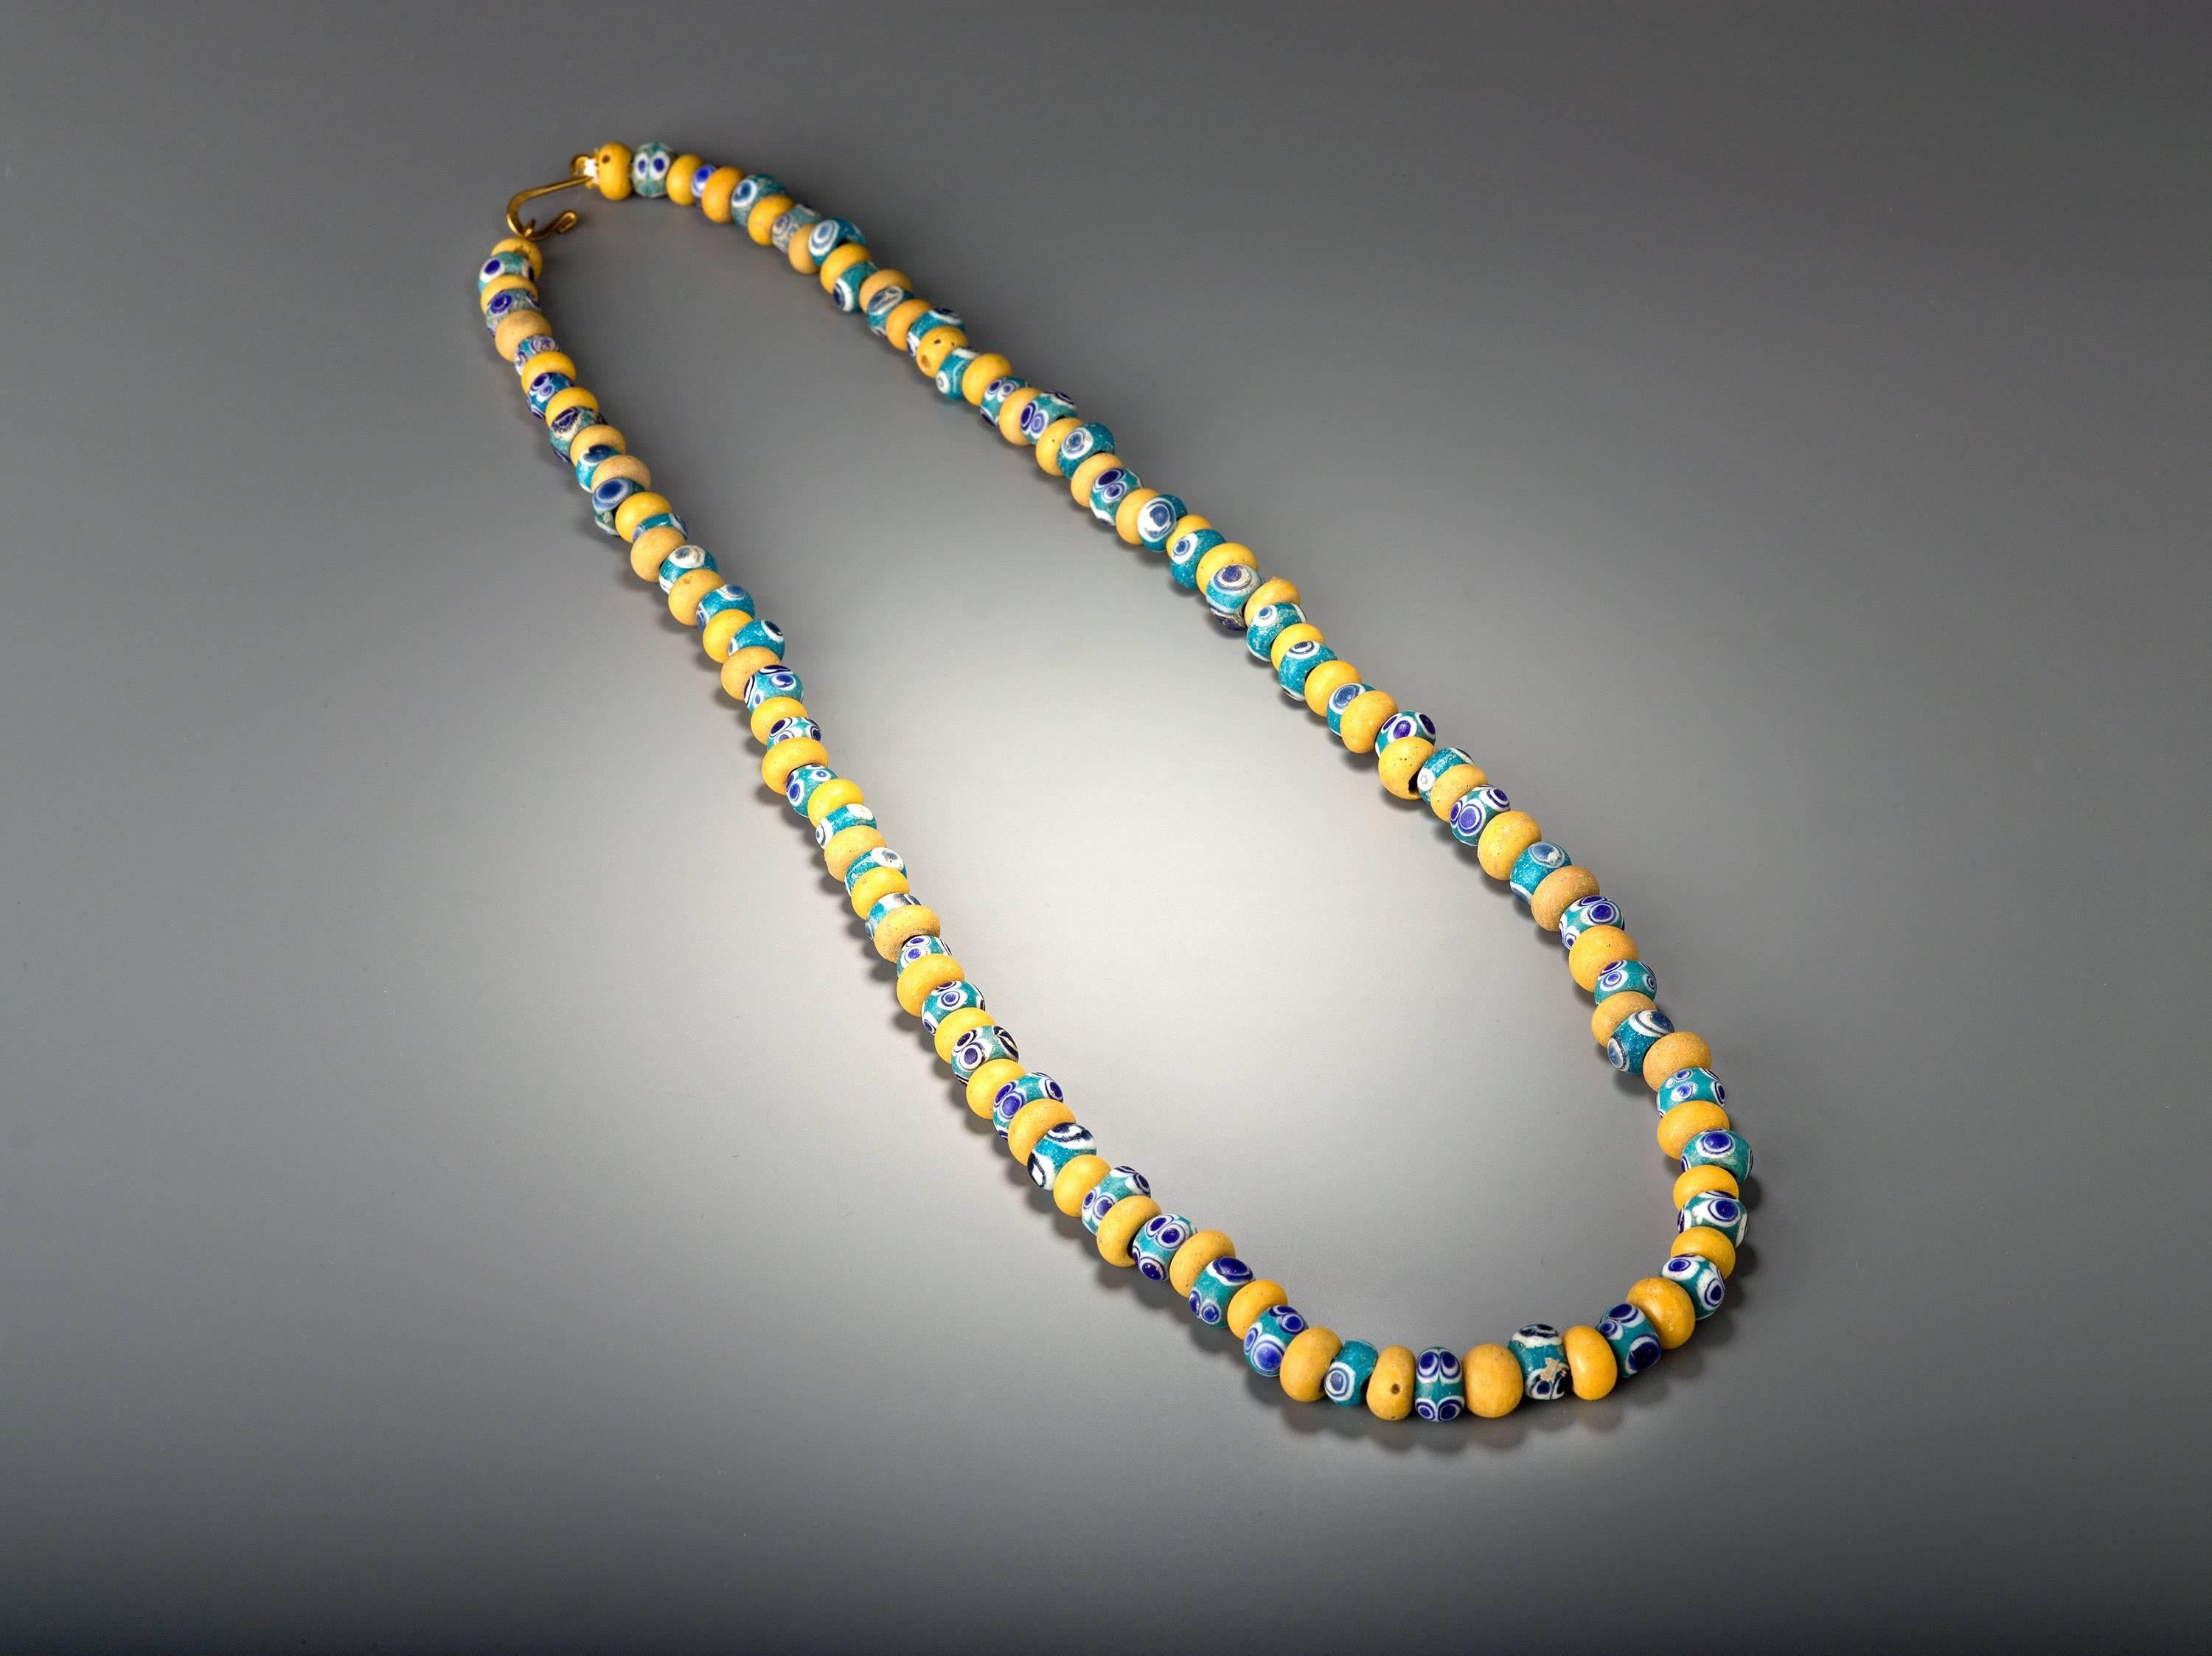 The necklace is composed of turquoise blue and white beads with dark blue eyes. These eye beads are alternated with plain yellow glass beads, an assembly of 120 beads making it to a most desirable and wearable piece of jewelry.
Provenance: Private